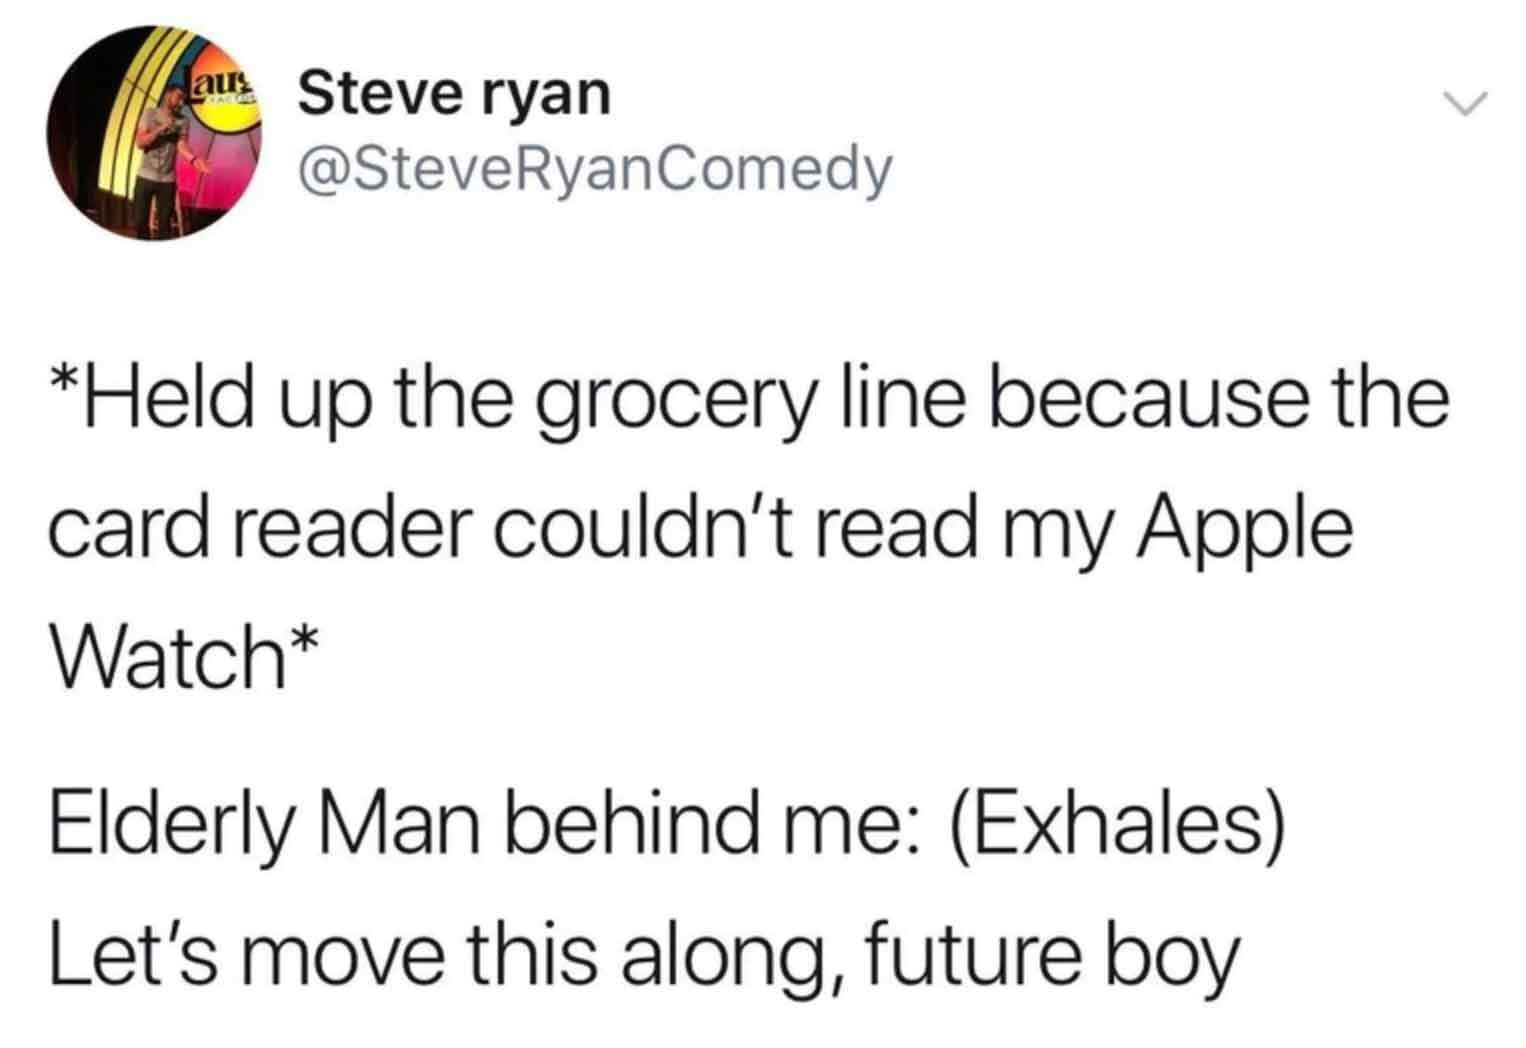 funny and svage memes - au Steve ryan Comedy Held up the grocery line because the card reader couldn't read my Apple Watch Elderly Man behind me Exhales Let's move this along, future boy